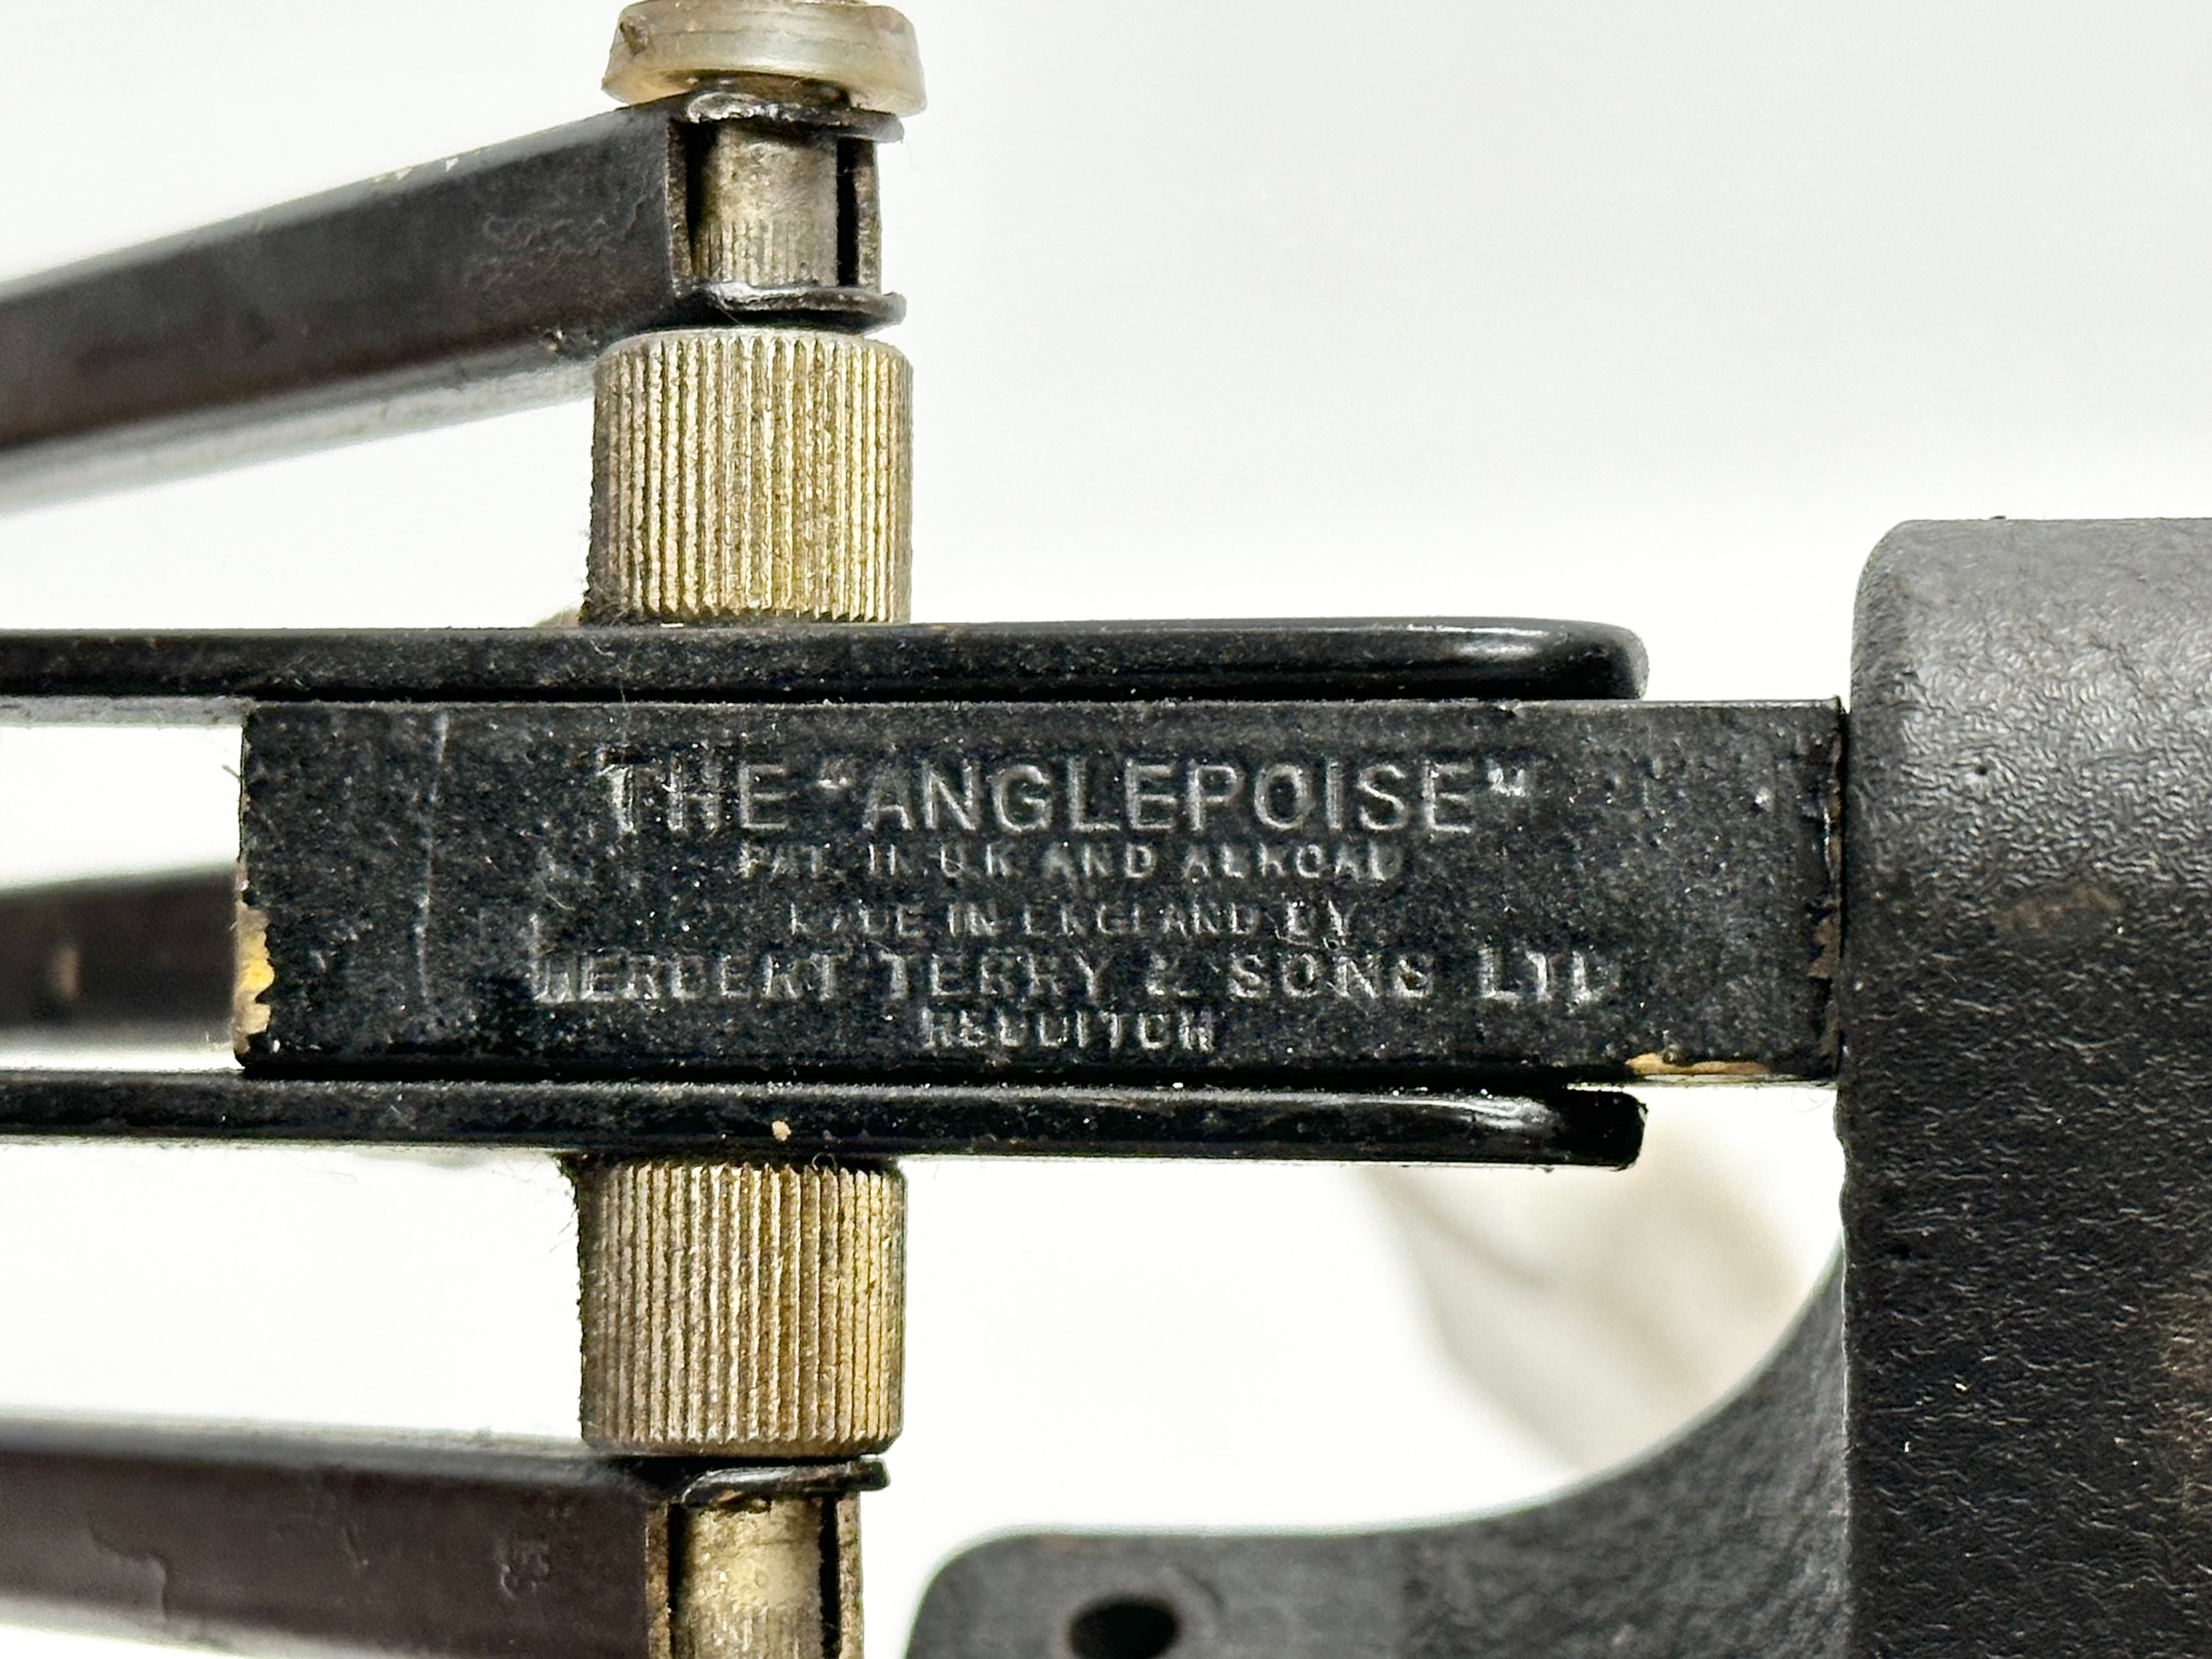 Herbert Terry ‘The Anglepoise’ ‘1209’ wall mounted anglepoise lamp by Herbert Terry & Sons LTD. - Image 4 of 5